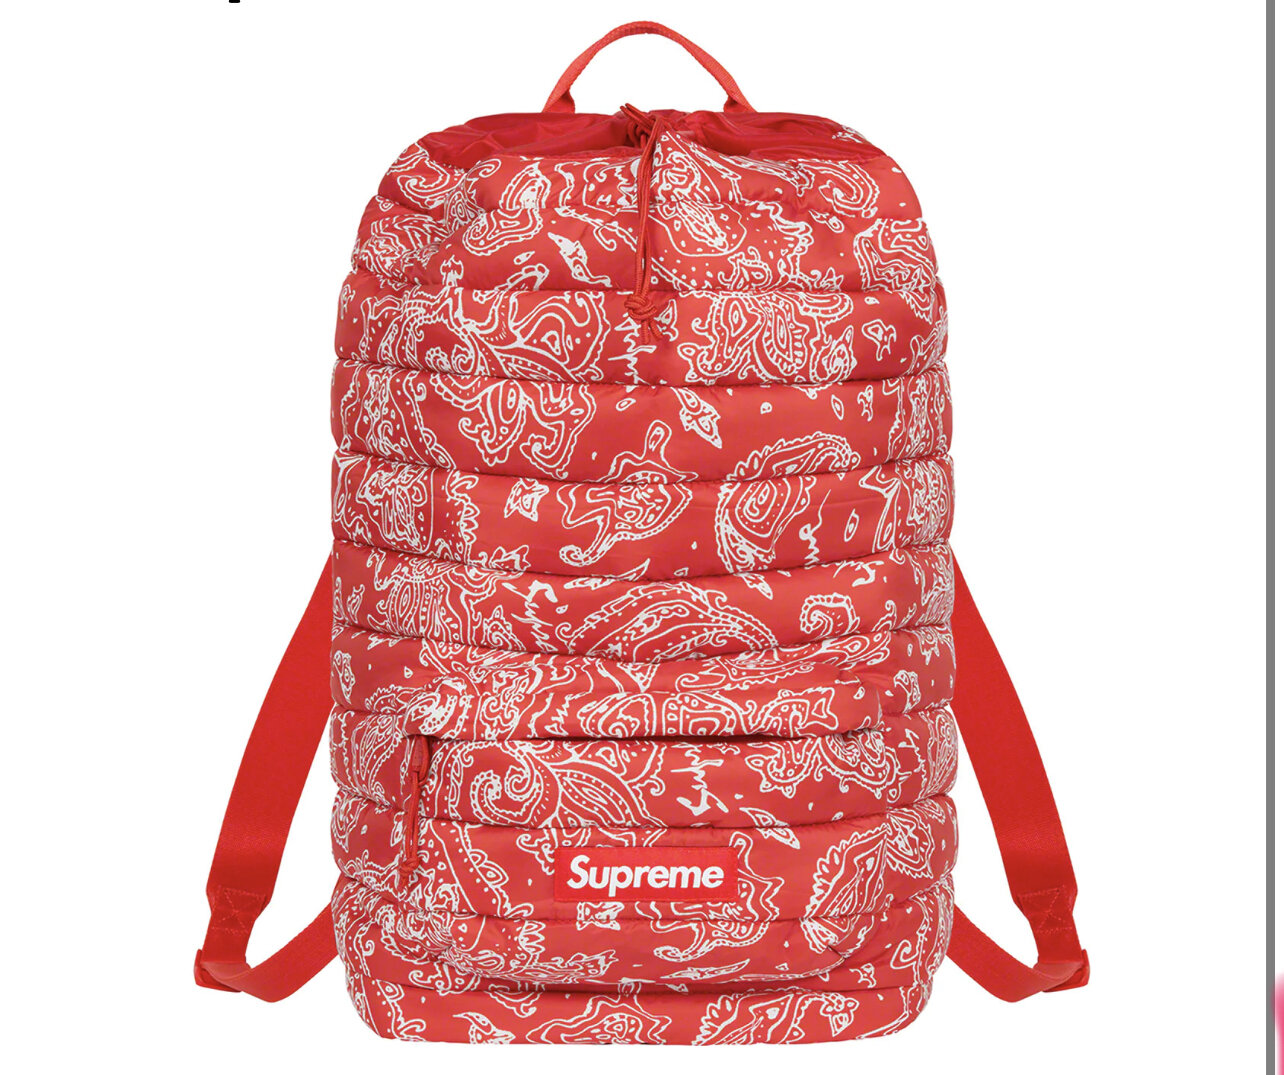 Supreme Puffer Red Backpack<br/>Supreme Puffer Red Paisley Backpack<br/>Hype6ix  — Hype6ix